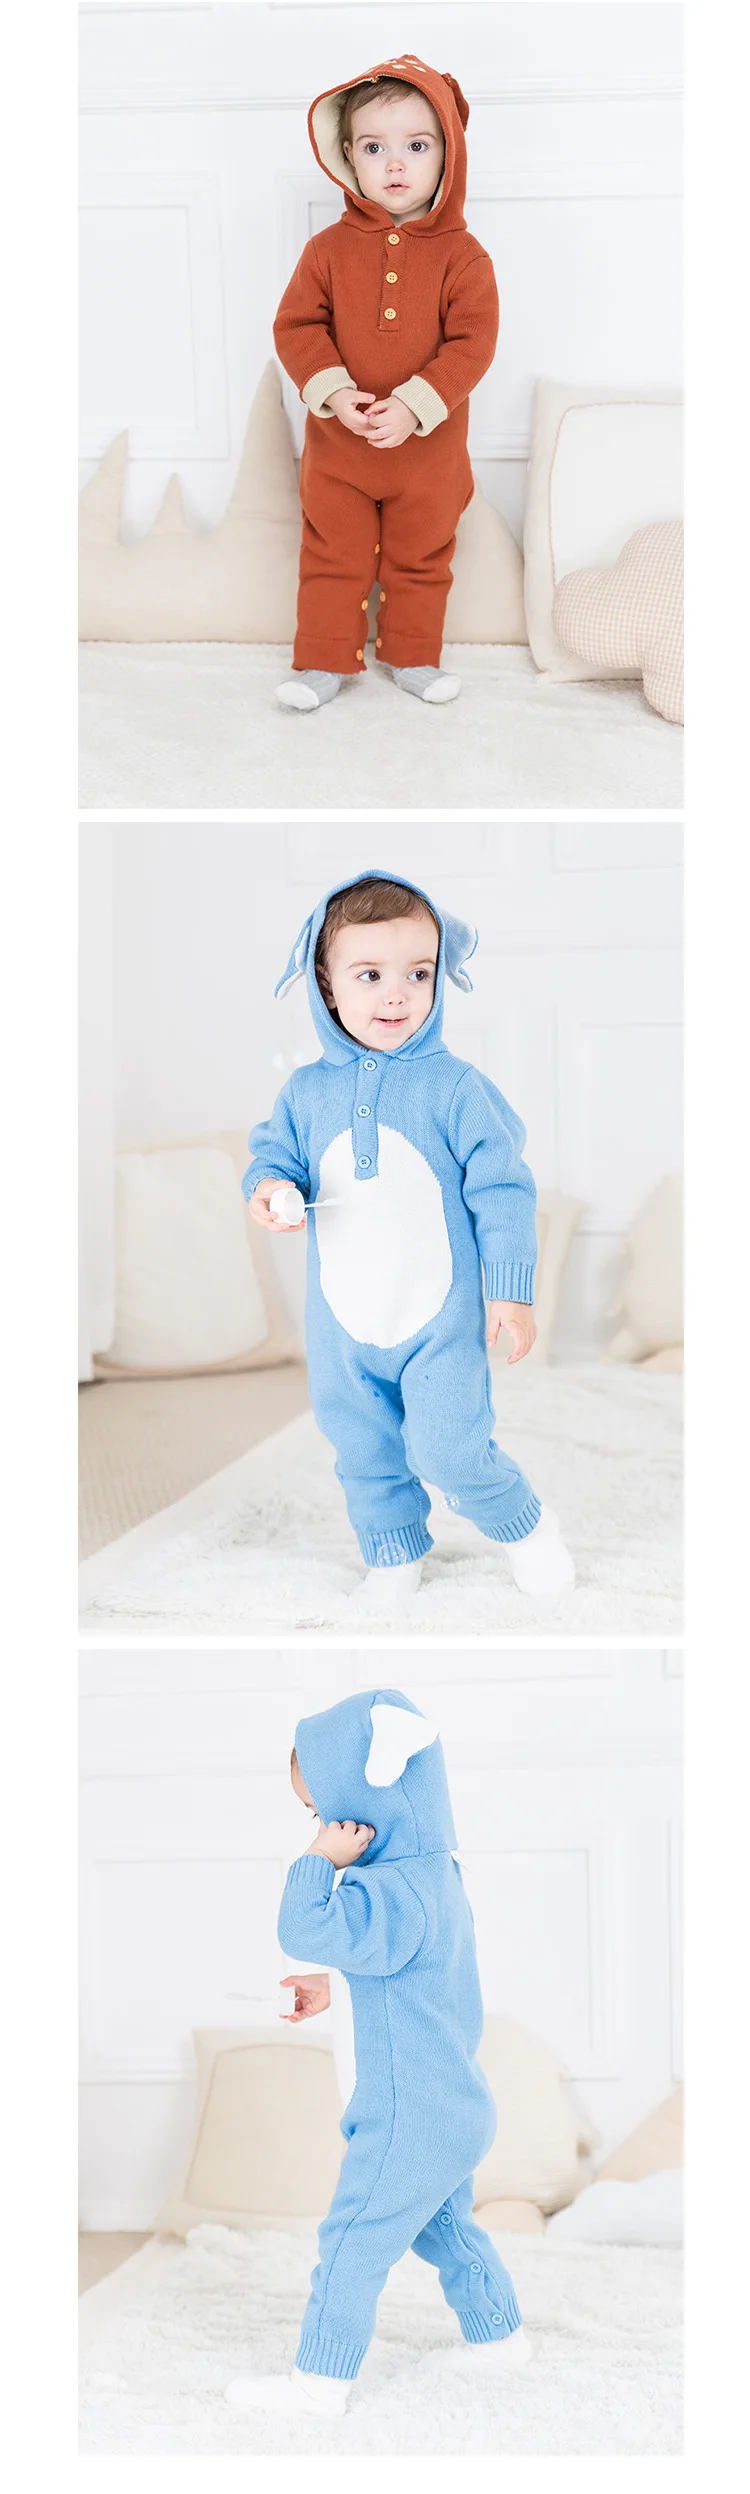 Baby Knit Clothes Children's Winter Overalls Deer Bodysuit Jumpsuit Overalls For Newborn Coverall Winter Child